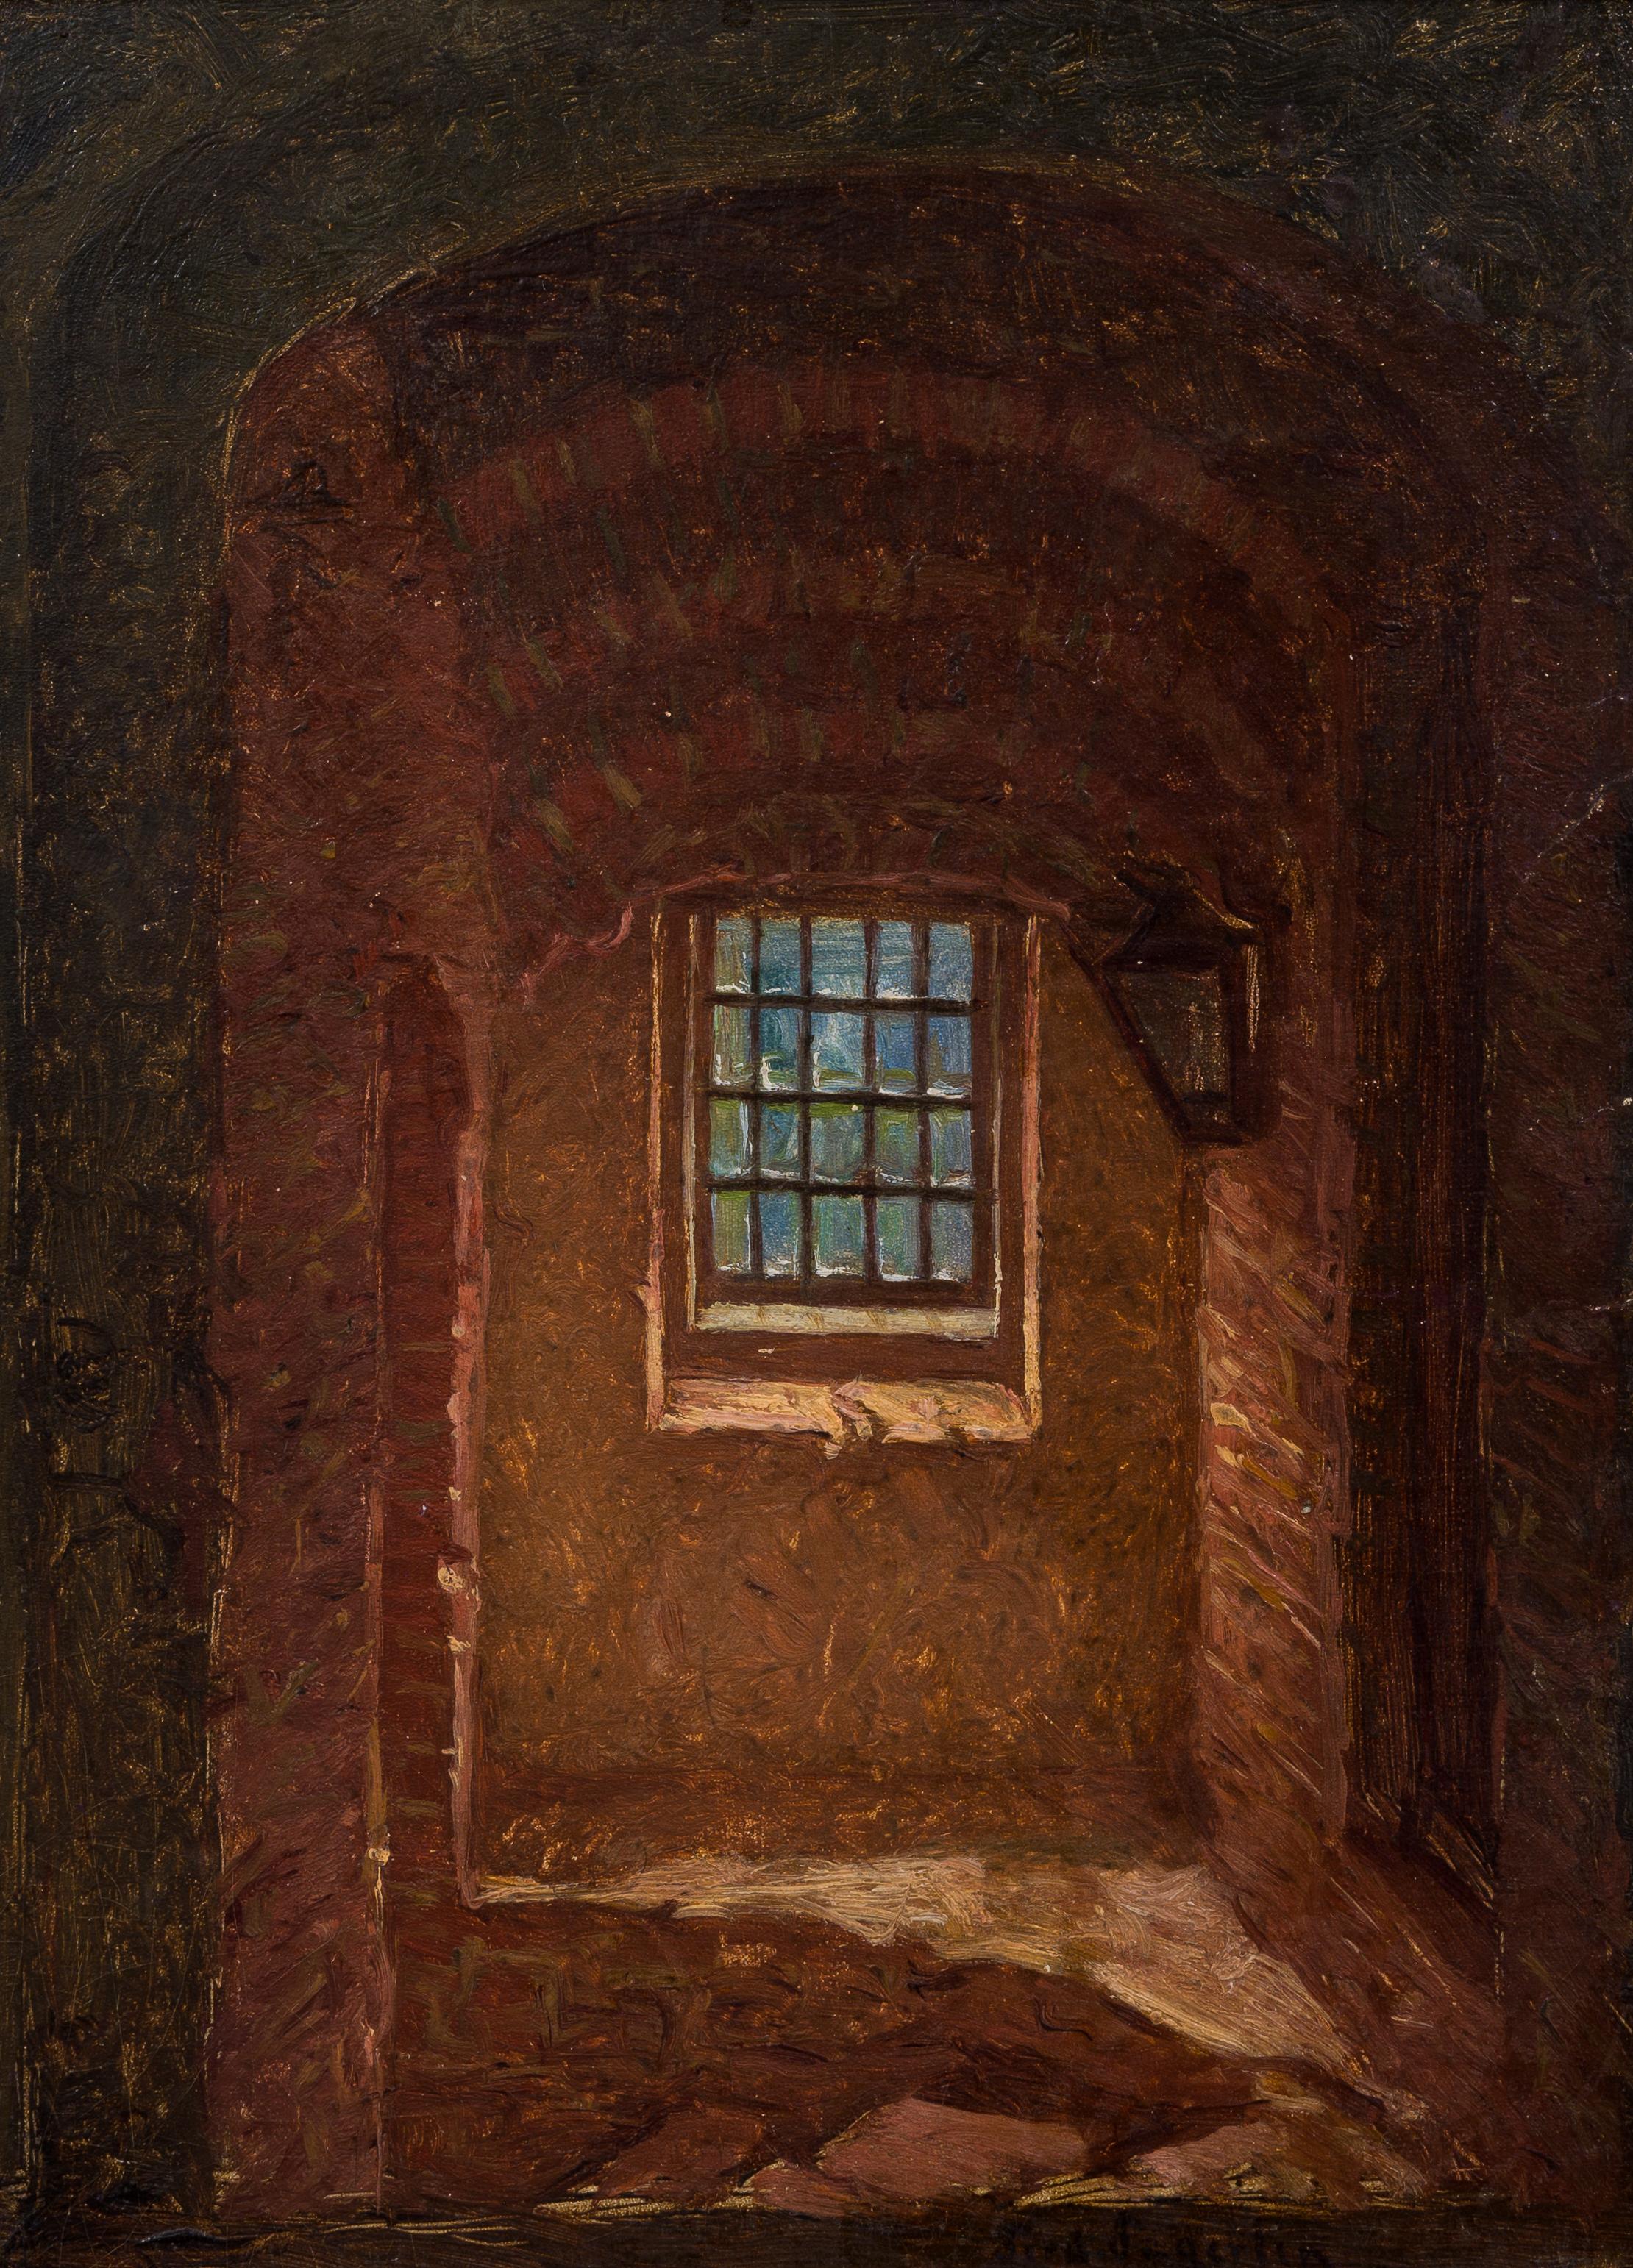 This oil painting called The Old Stone Stairway by Ferdinand Fagerlin offers an intimate glimpse into a quiet interior space, where the stillness of the scene is punctuated by the soft daylight filtering through a window. Measuring a modest 24 x 18